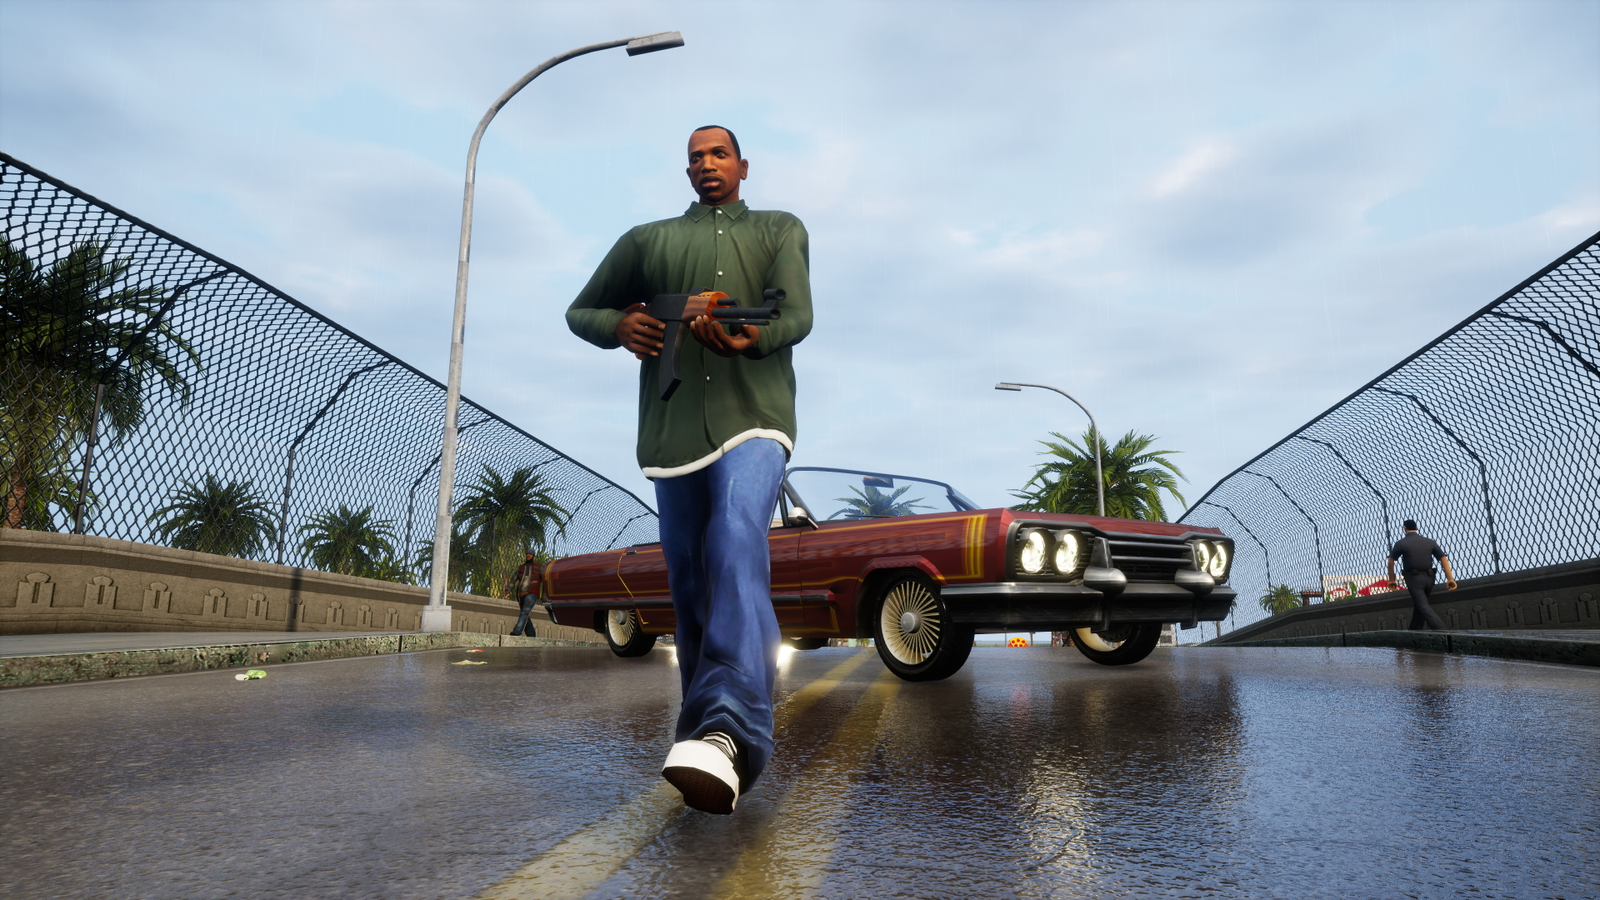 GTA San Andreas cheats for PC, PlayStation, Xbox, Android: Here's the  complete list